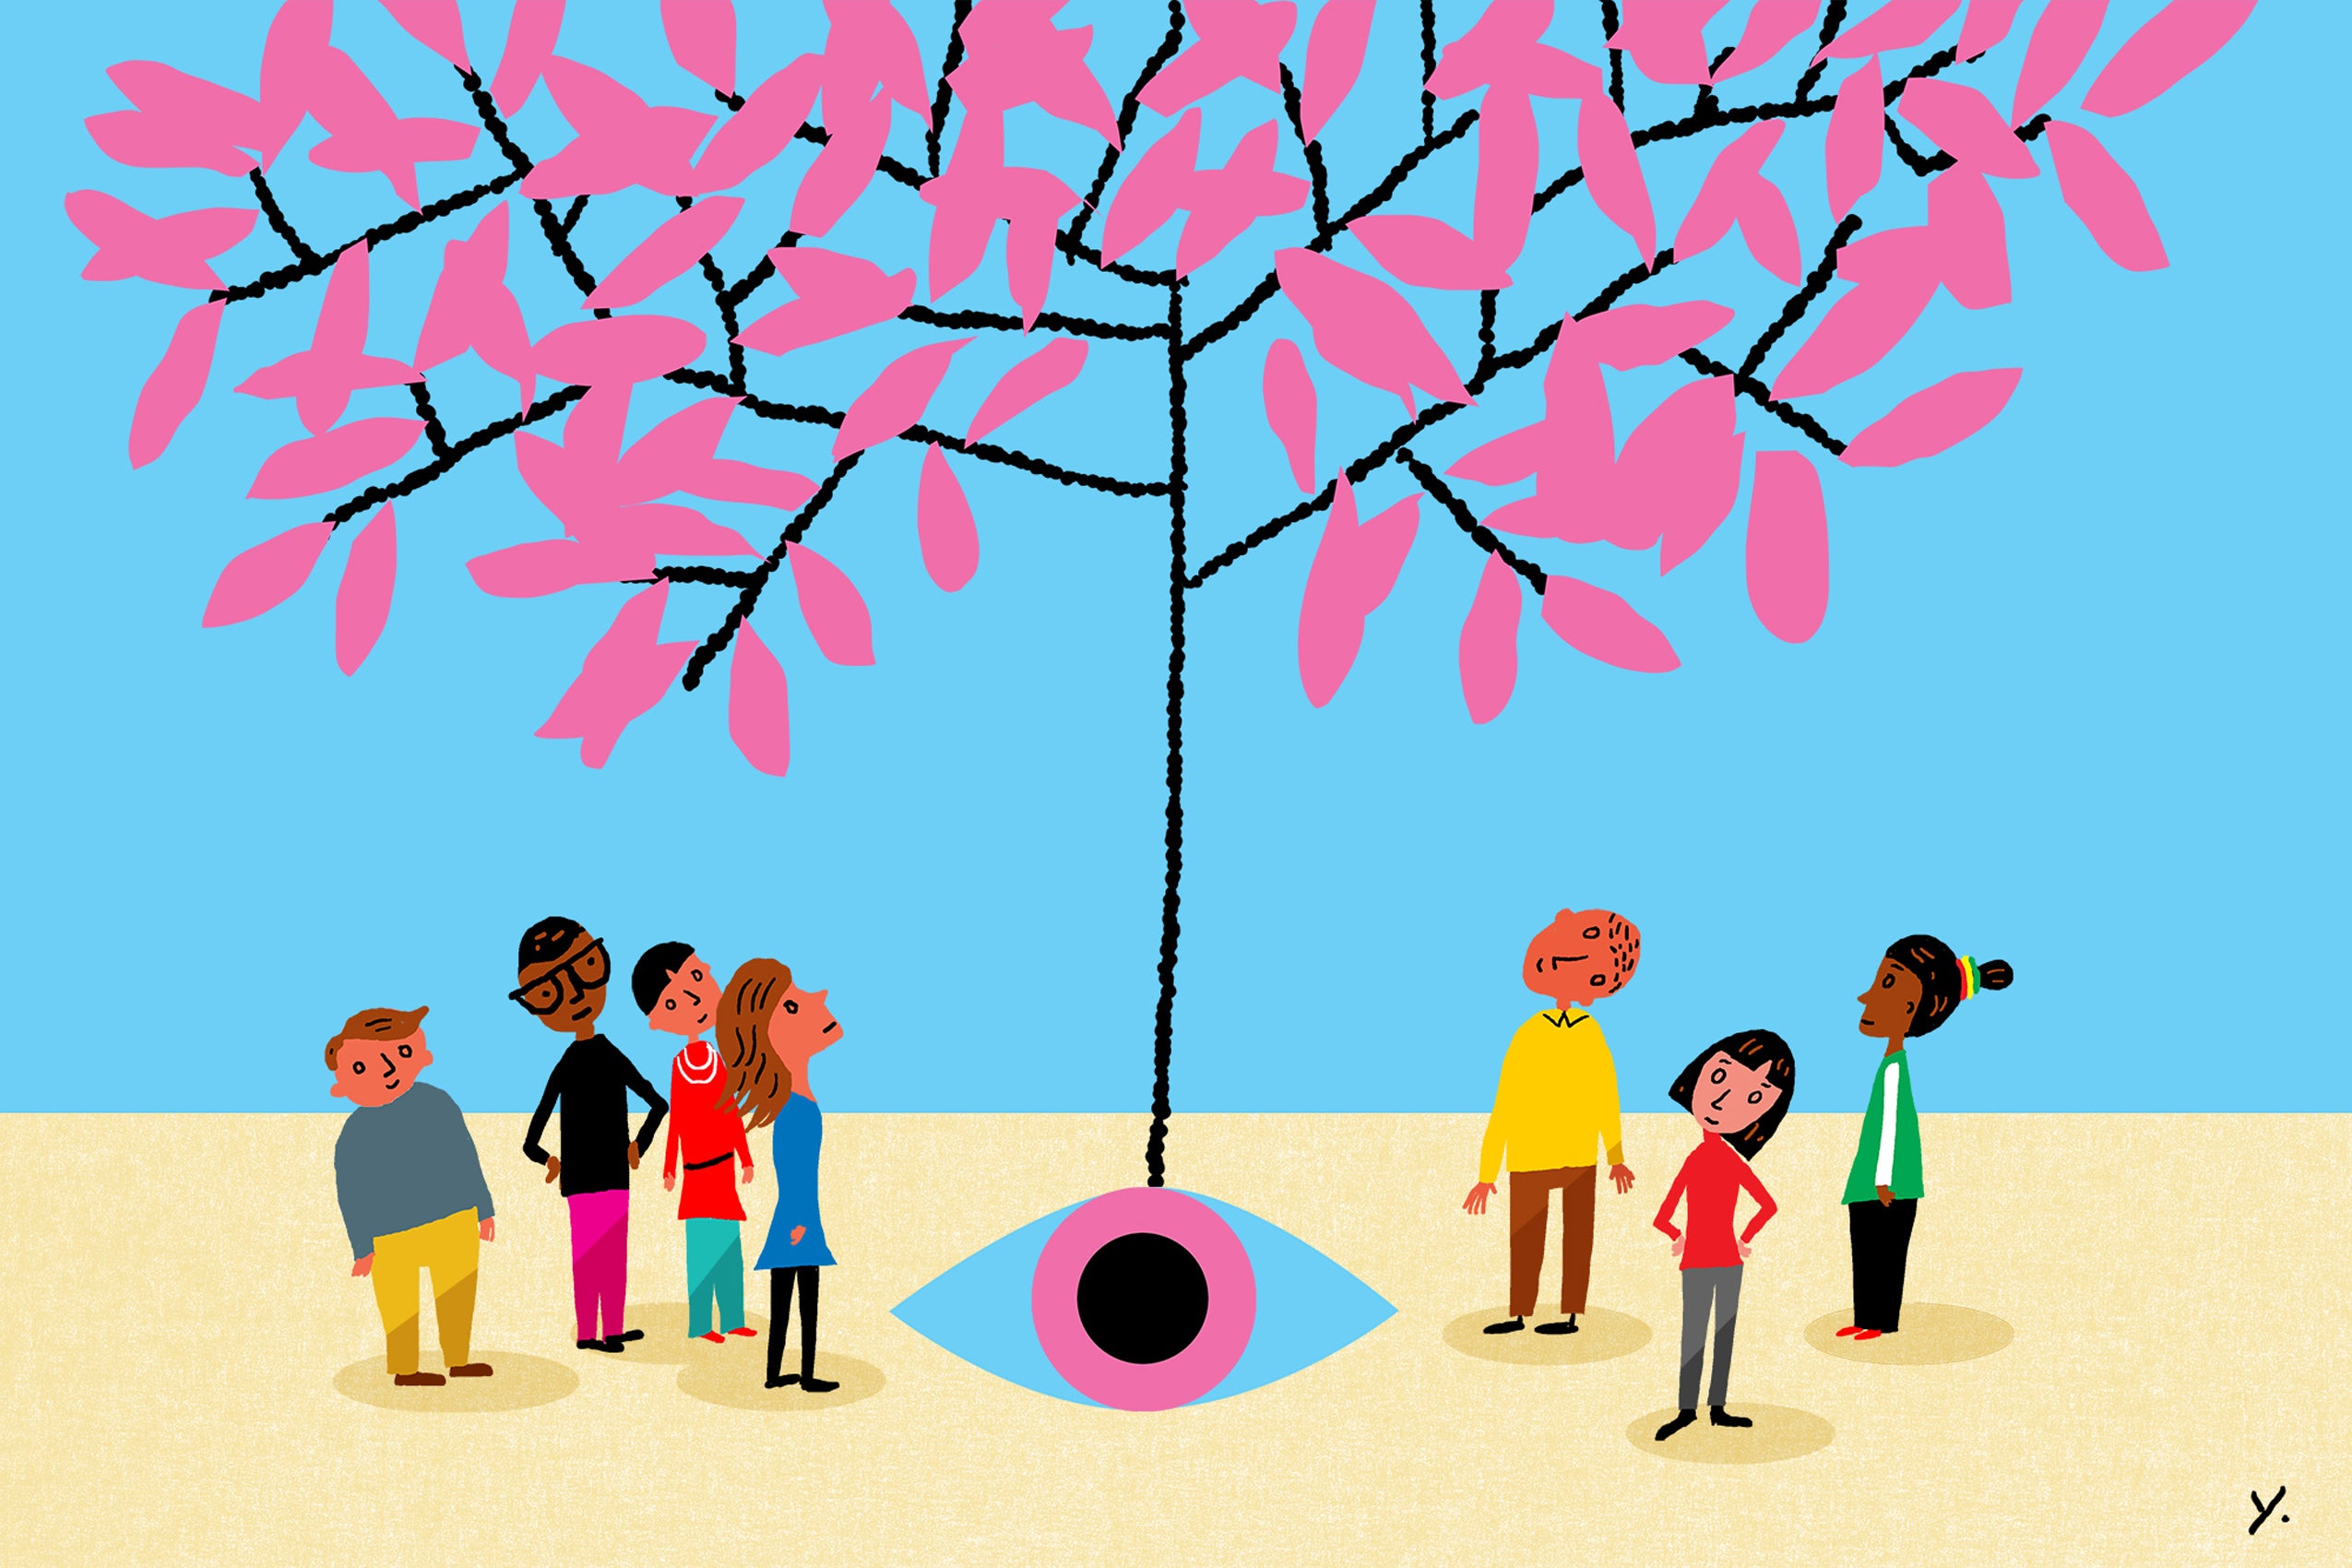 Illustration of people looking up at a tree with pink leaves growing from a seed in the ground.